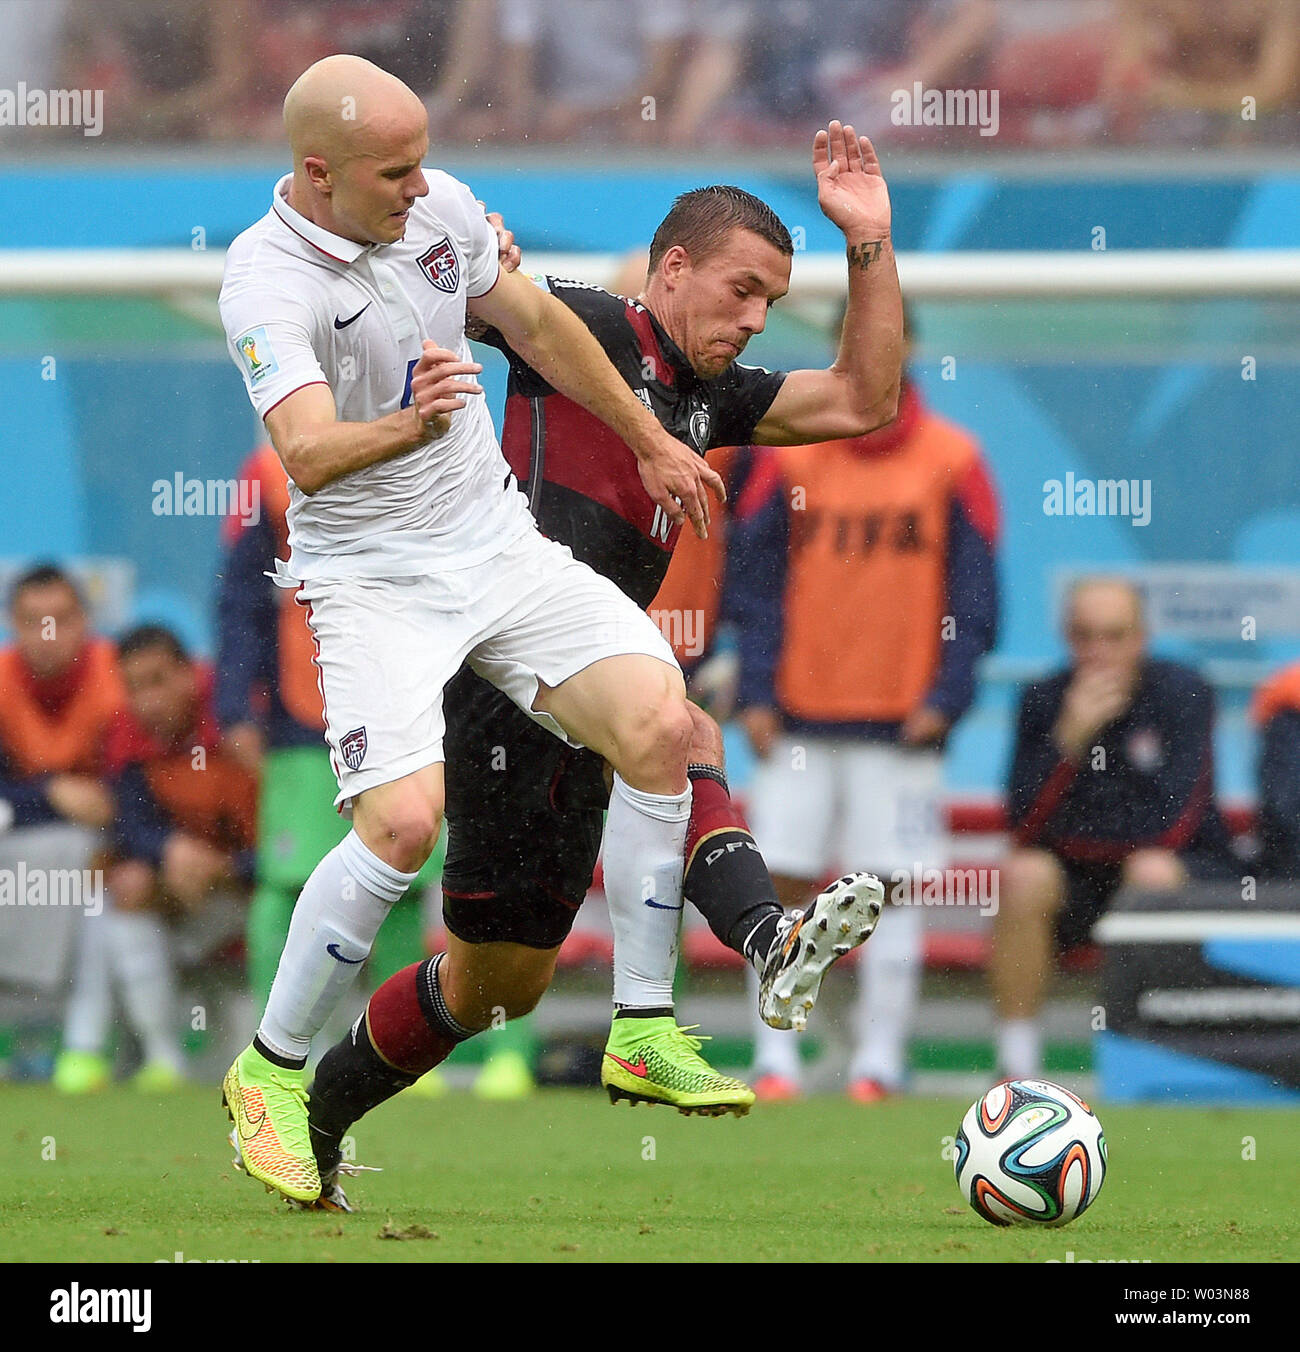 Michael Bradley (L) of USA competes with Lukasz Podolski of Germany during the 2014 FIFA World Cup Group G match at the Arena Pernambuco in Recife, Brazil on June 26, 2014. UPI/Chris Brunskill Stock Photo